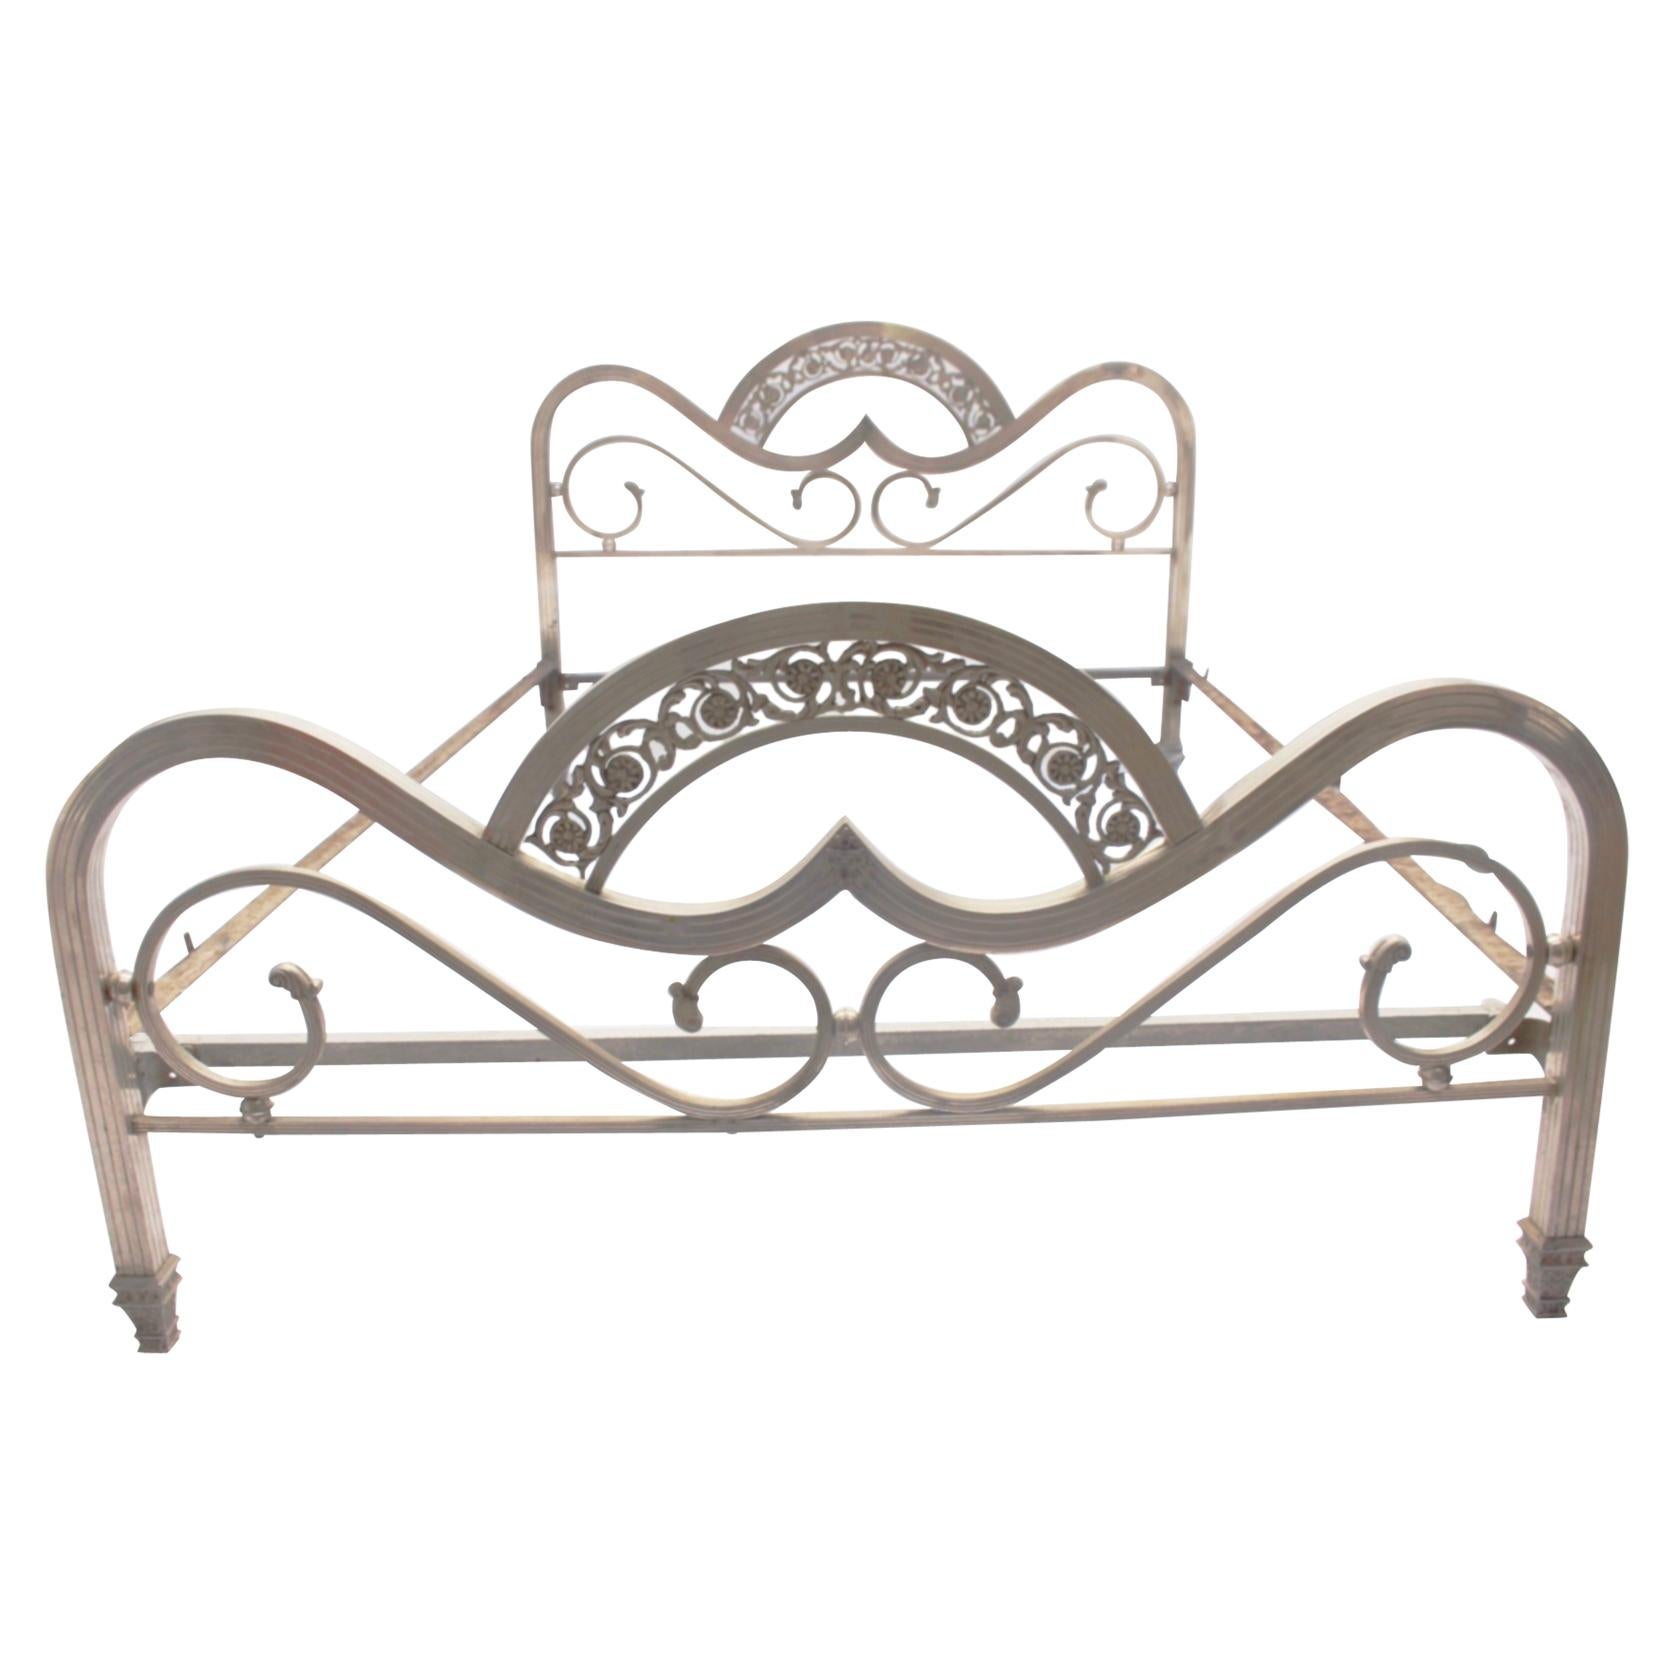 Art Deco Chrome Double Spanish Bed, Headboard and Foot Part, 1930s For Sale